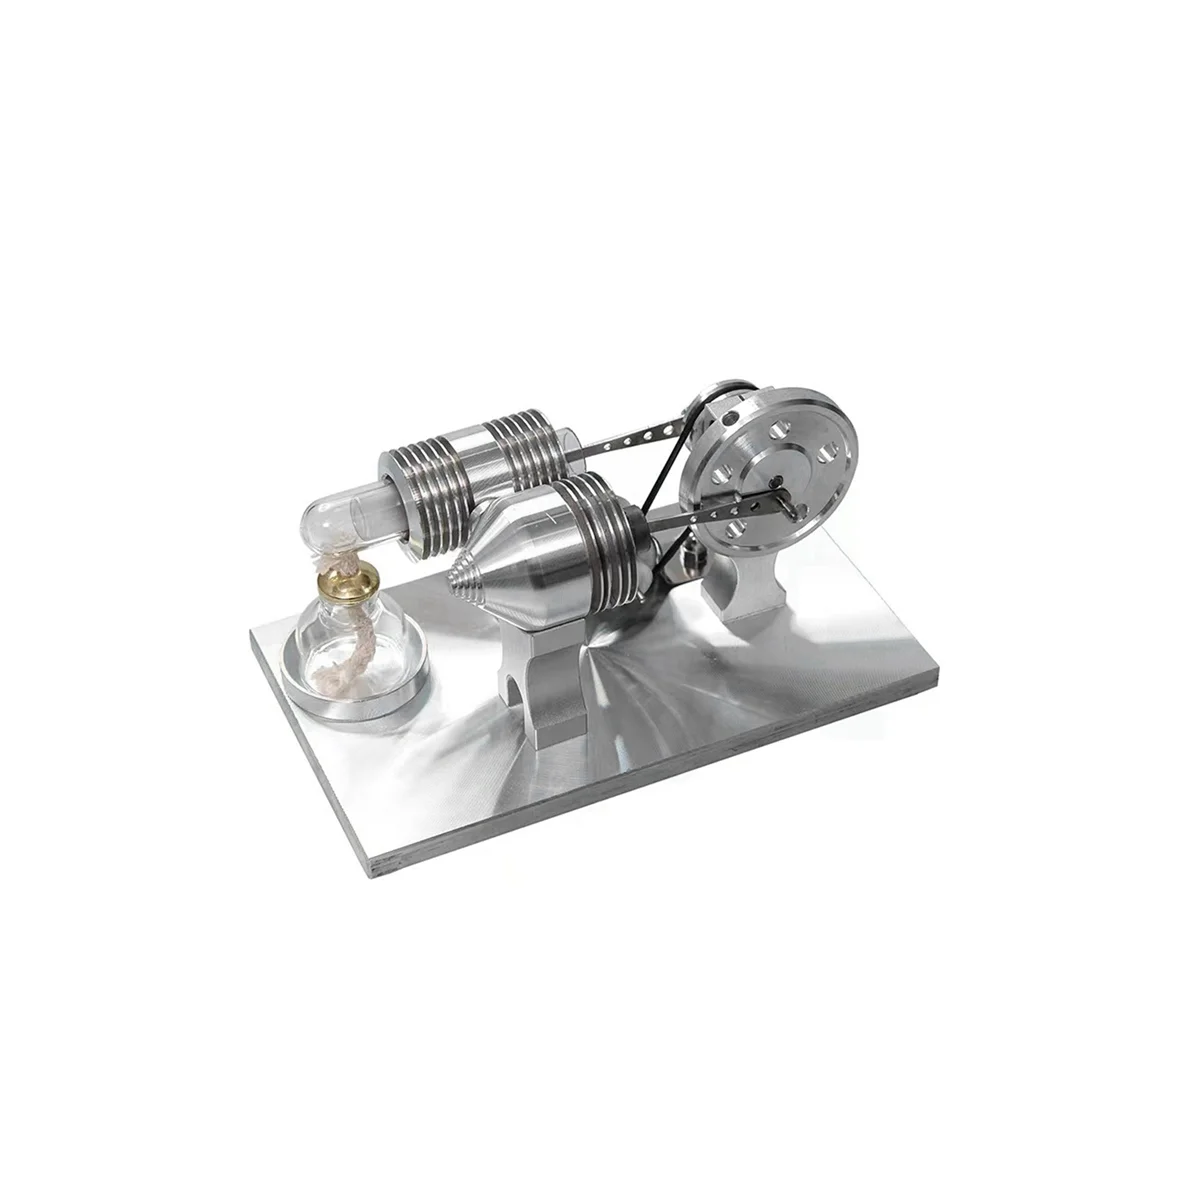 small-stirling-engine-model-can-start-fuel-mini-metal-assembled-toy-physics-experimental-education-aids